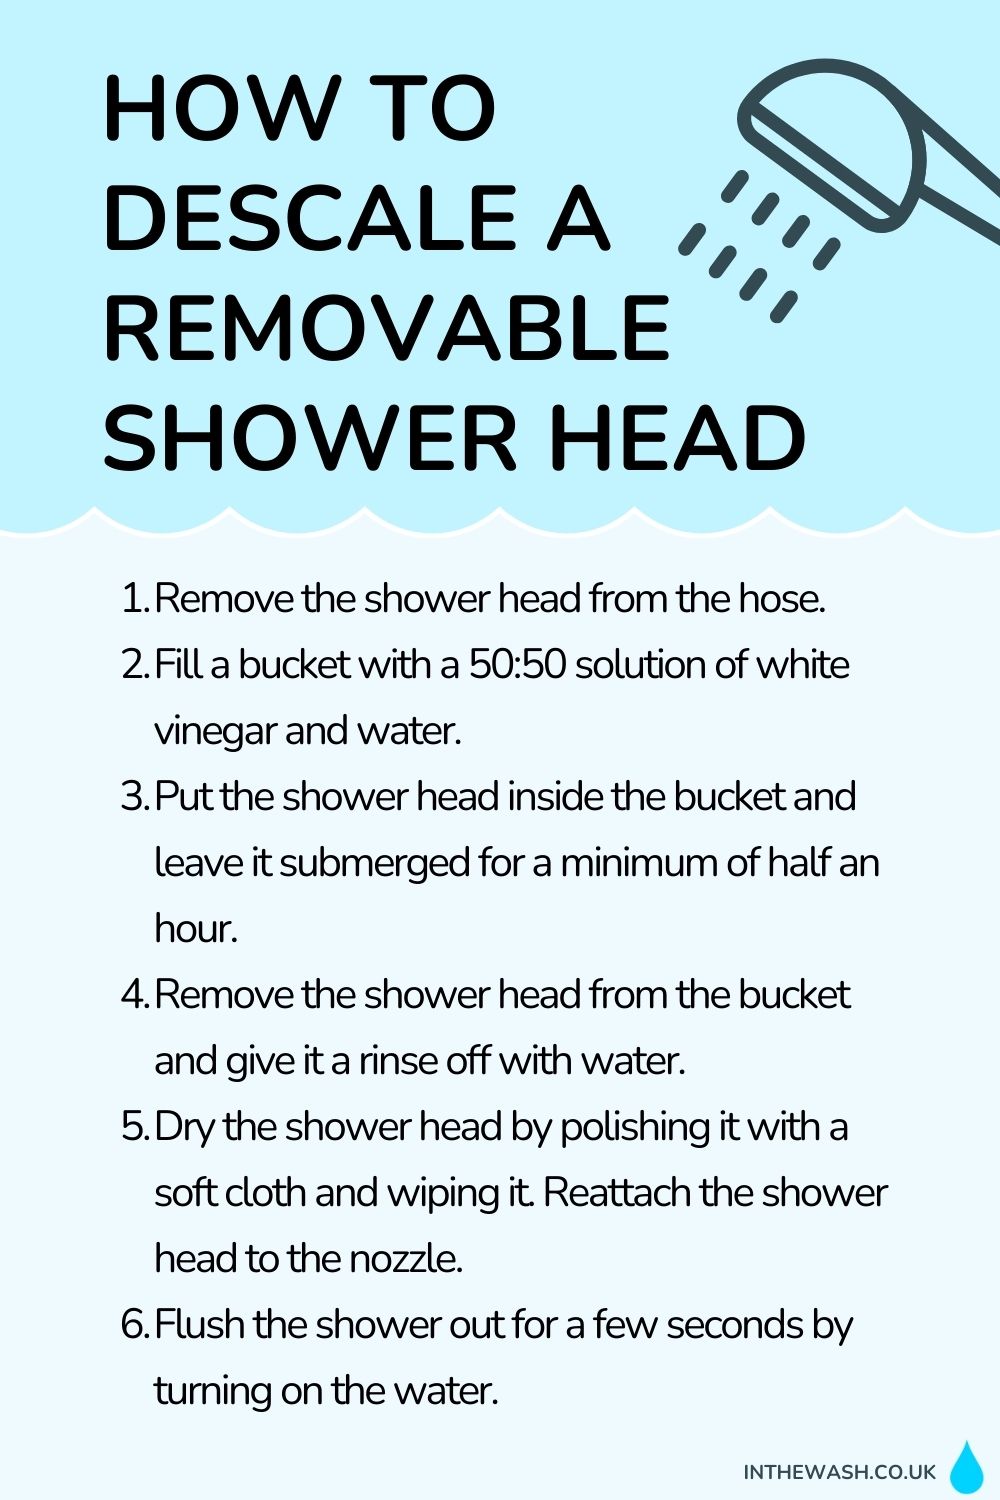 How to descale a removable shower head